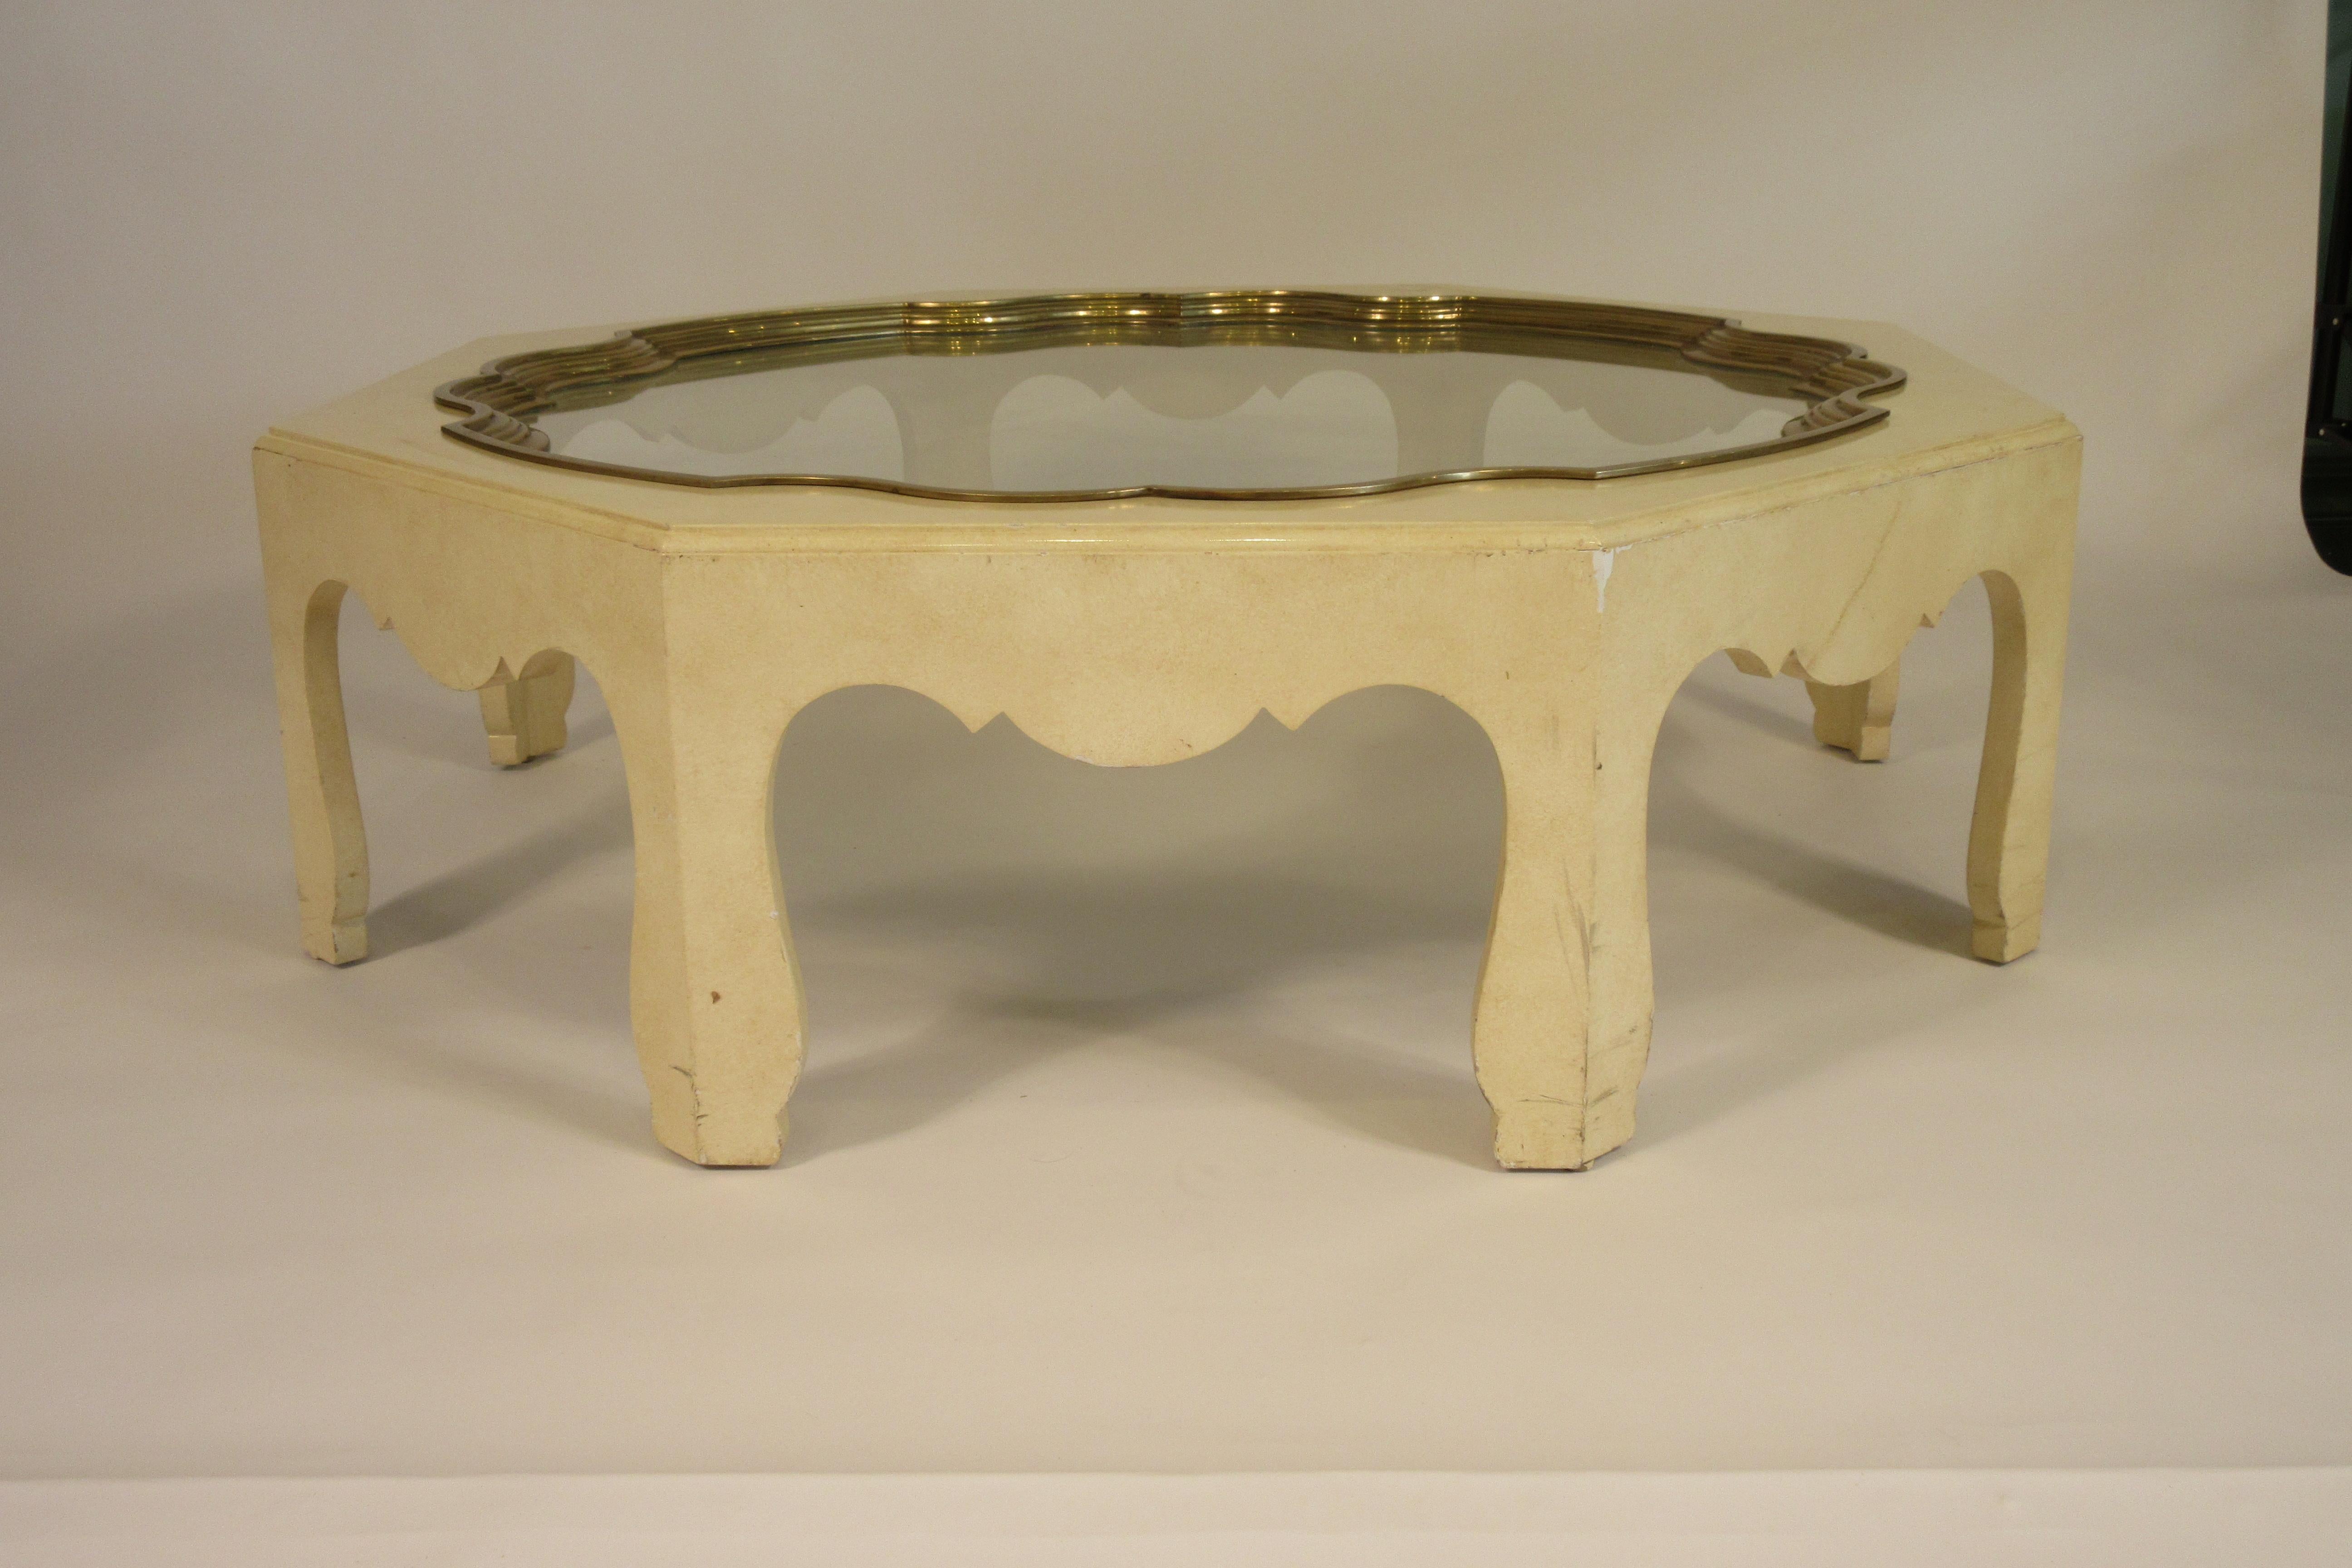 1970s Moorish coffee table. Brass and glass tray lifts out of the wood base. Wood base needs repainting.